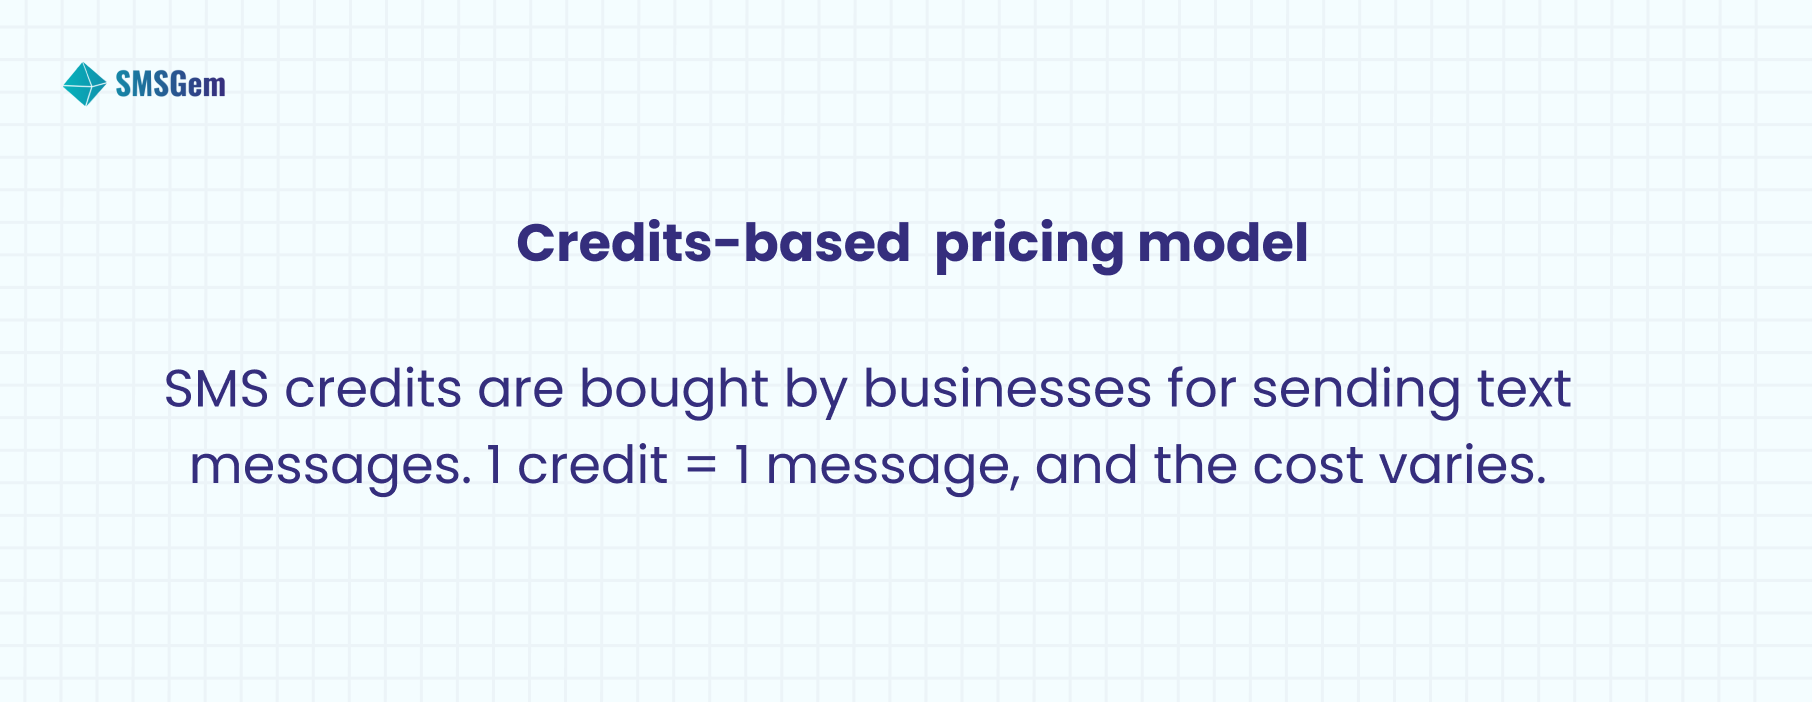 What is Credit-based pricing model?